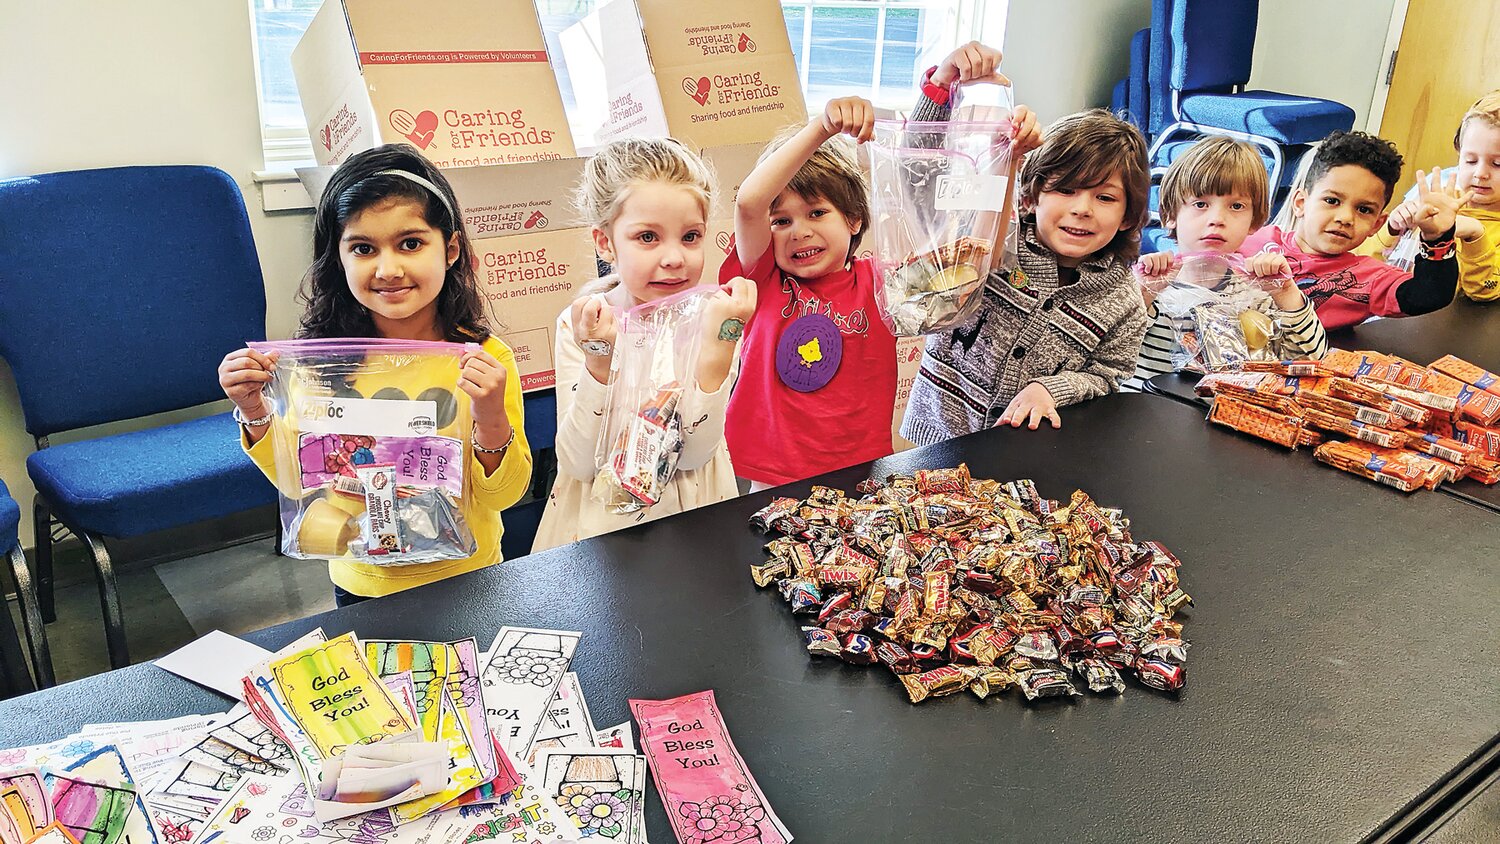 Woodside Christian Preschool students pack snack bags for Caring for Friends.